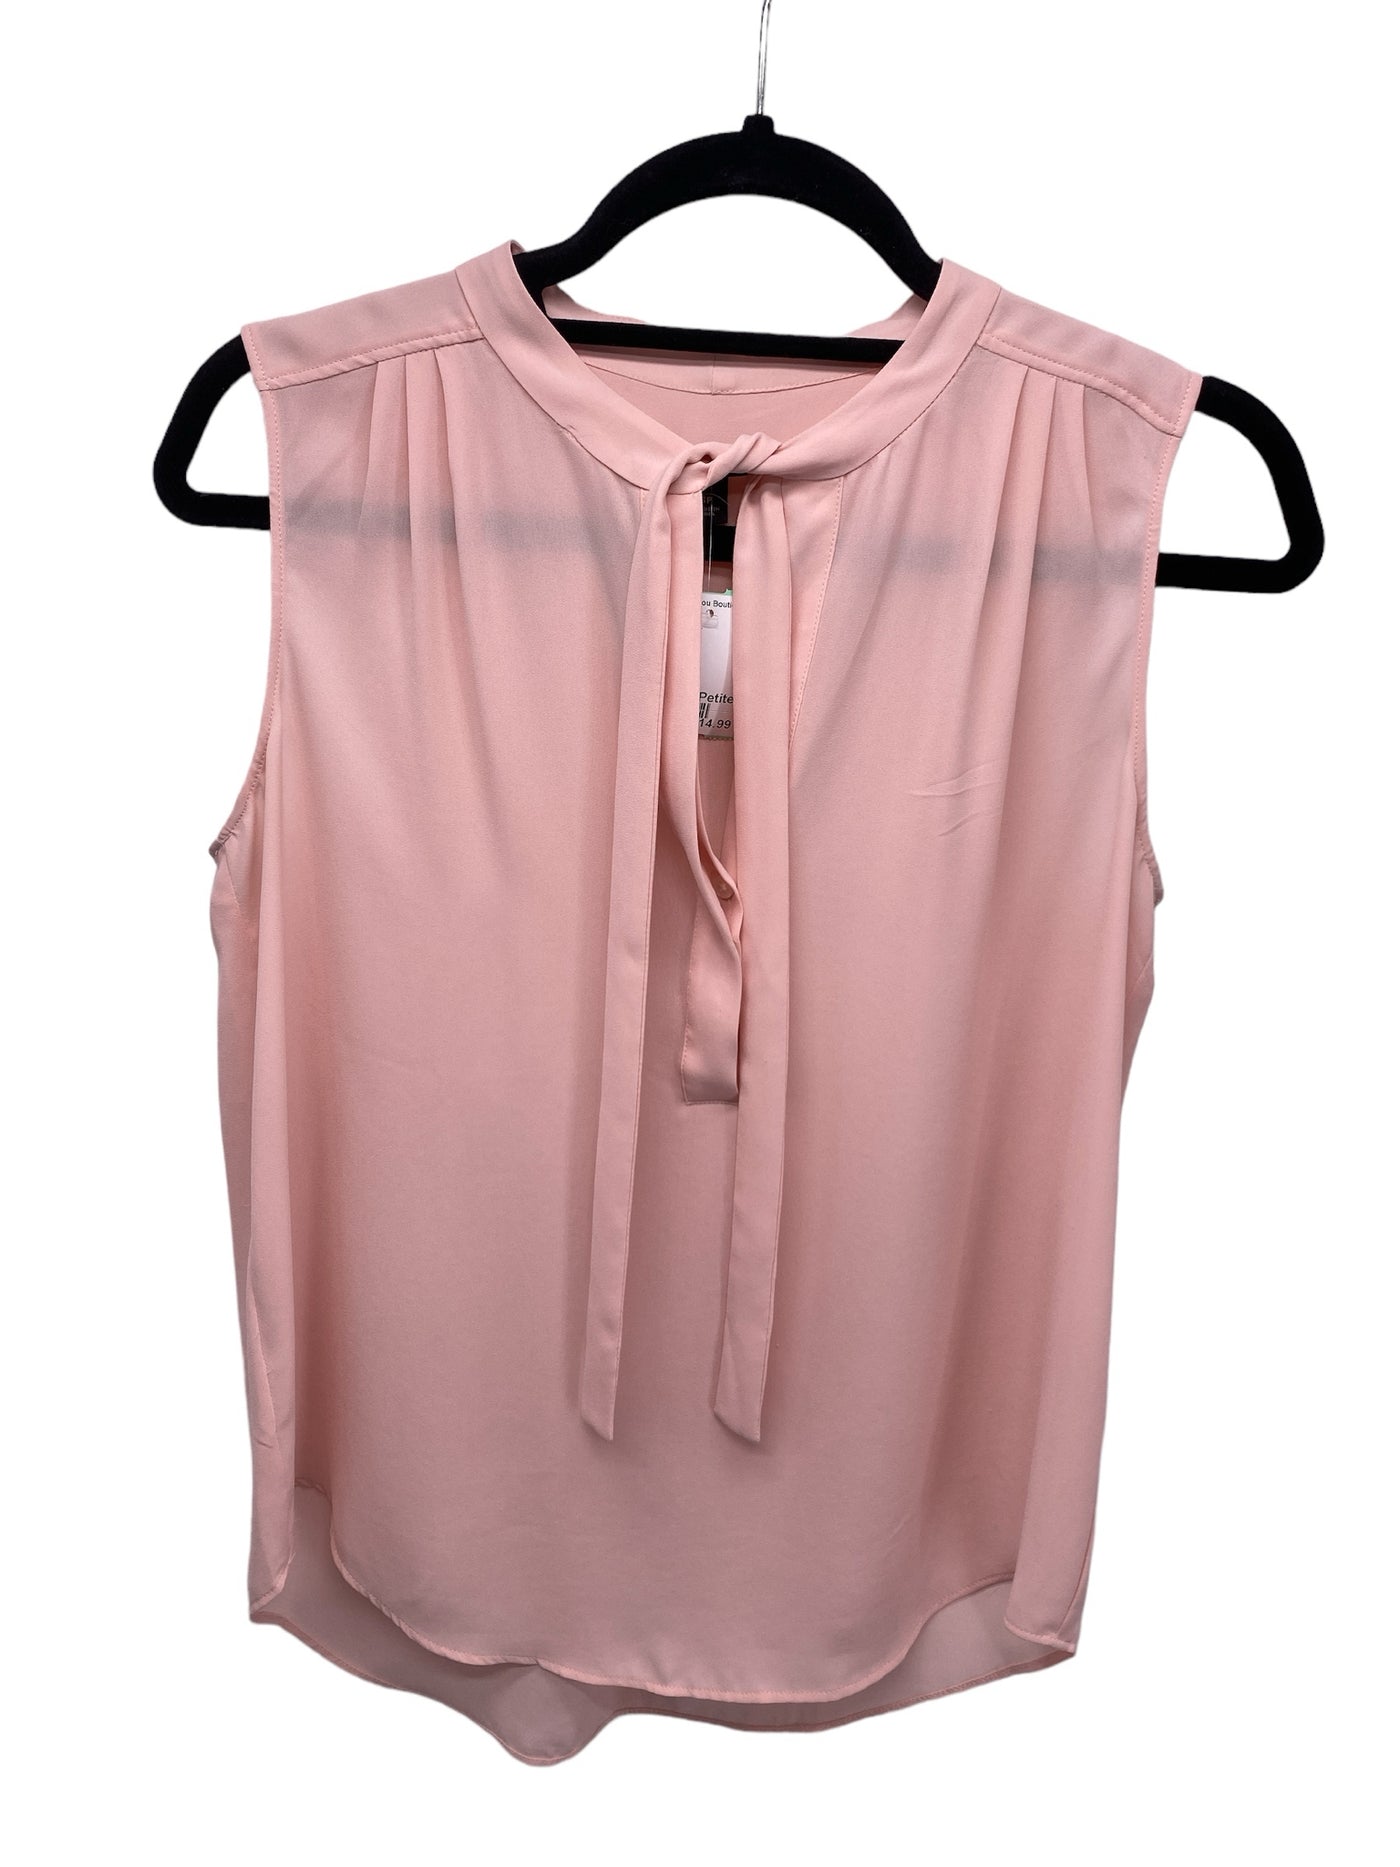 Ann Taylor Misses Size Small Petite Pink SL Blouse